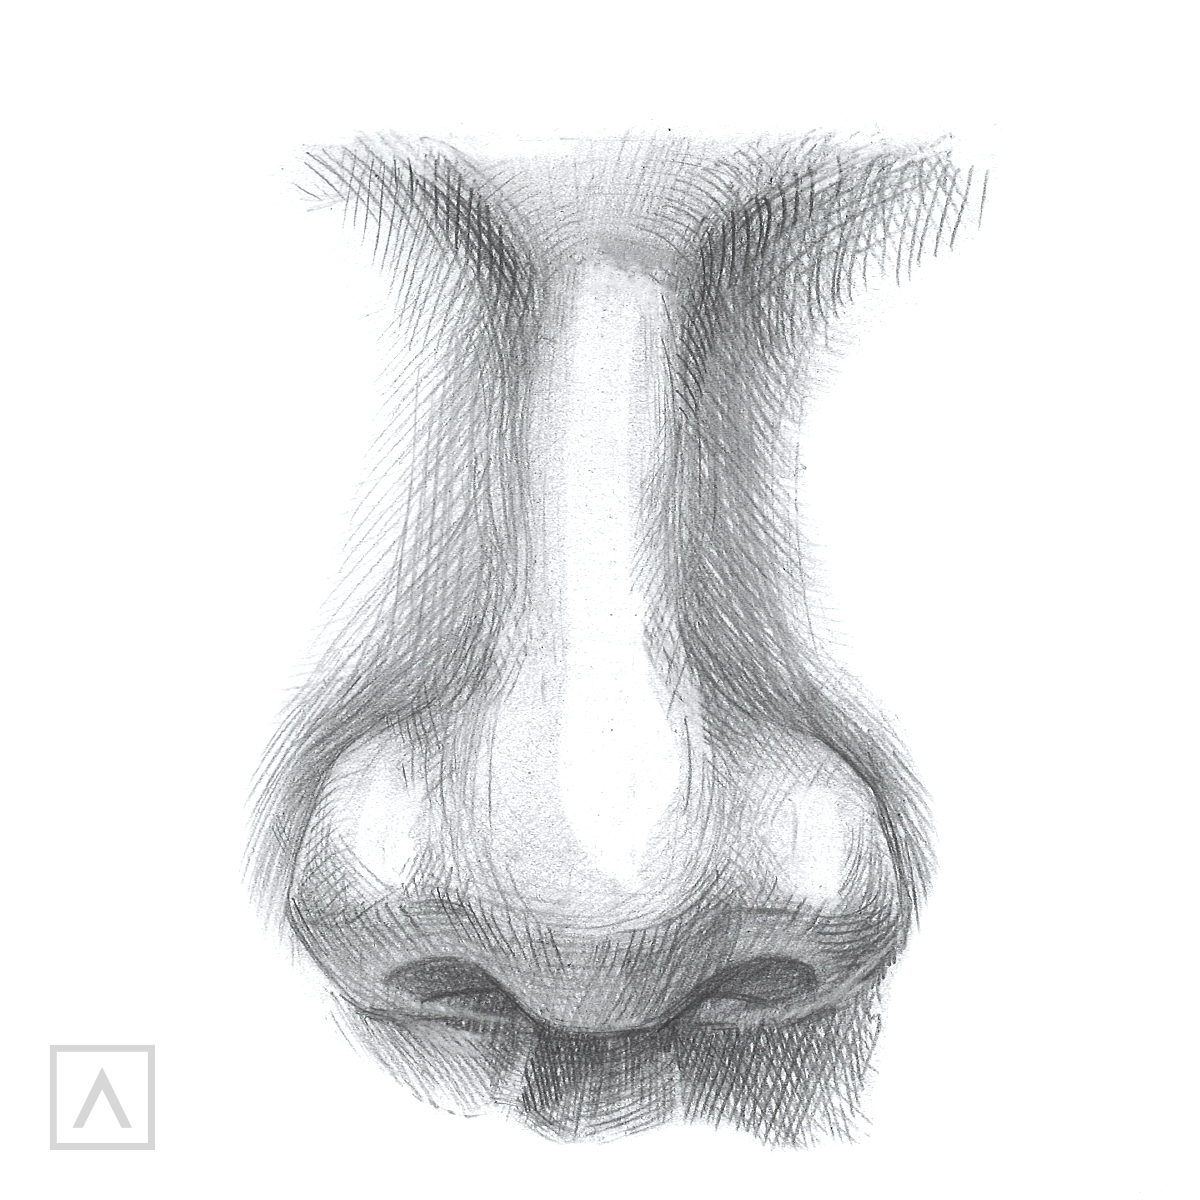 How to Draw a Rounded Nose